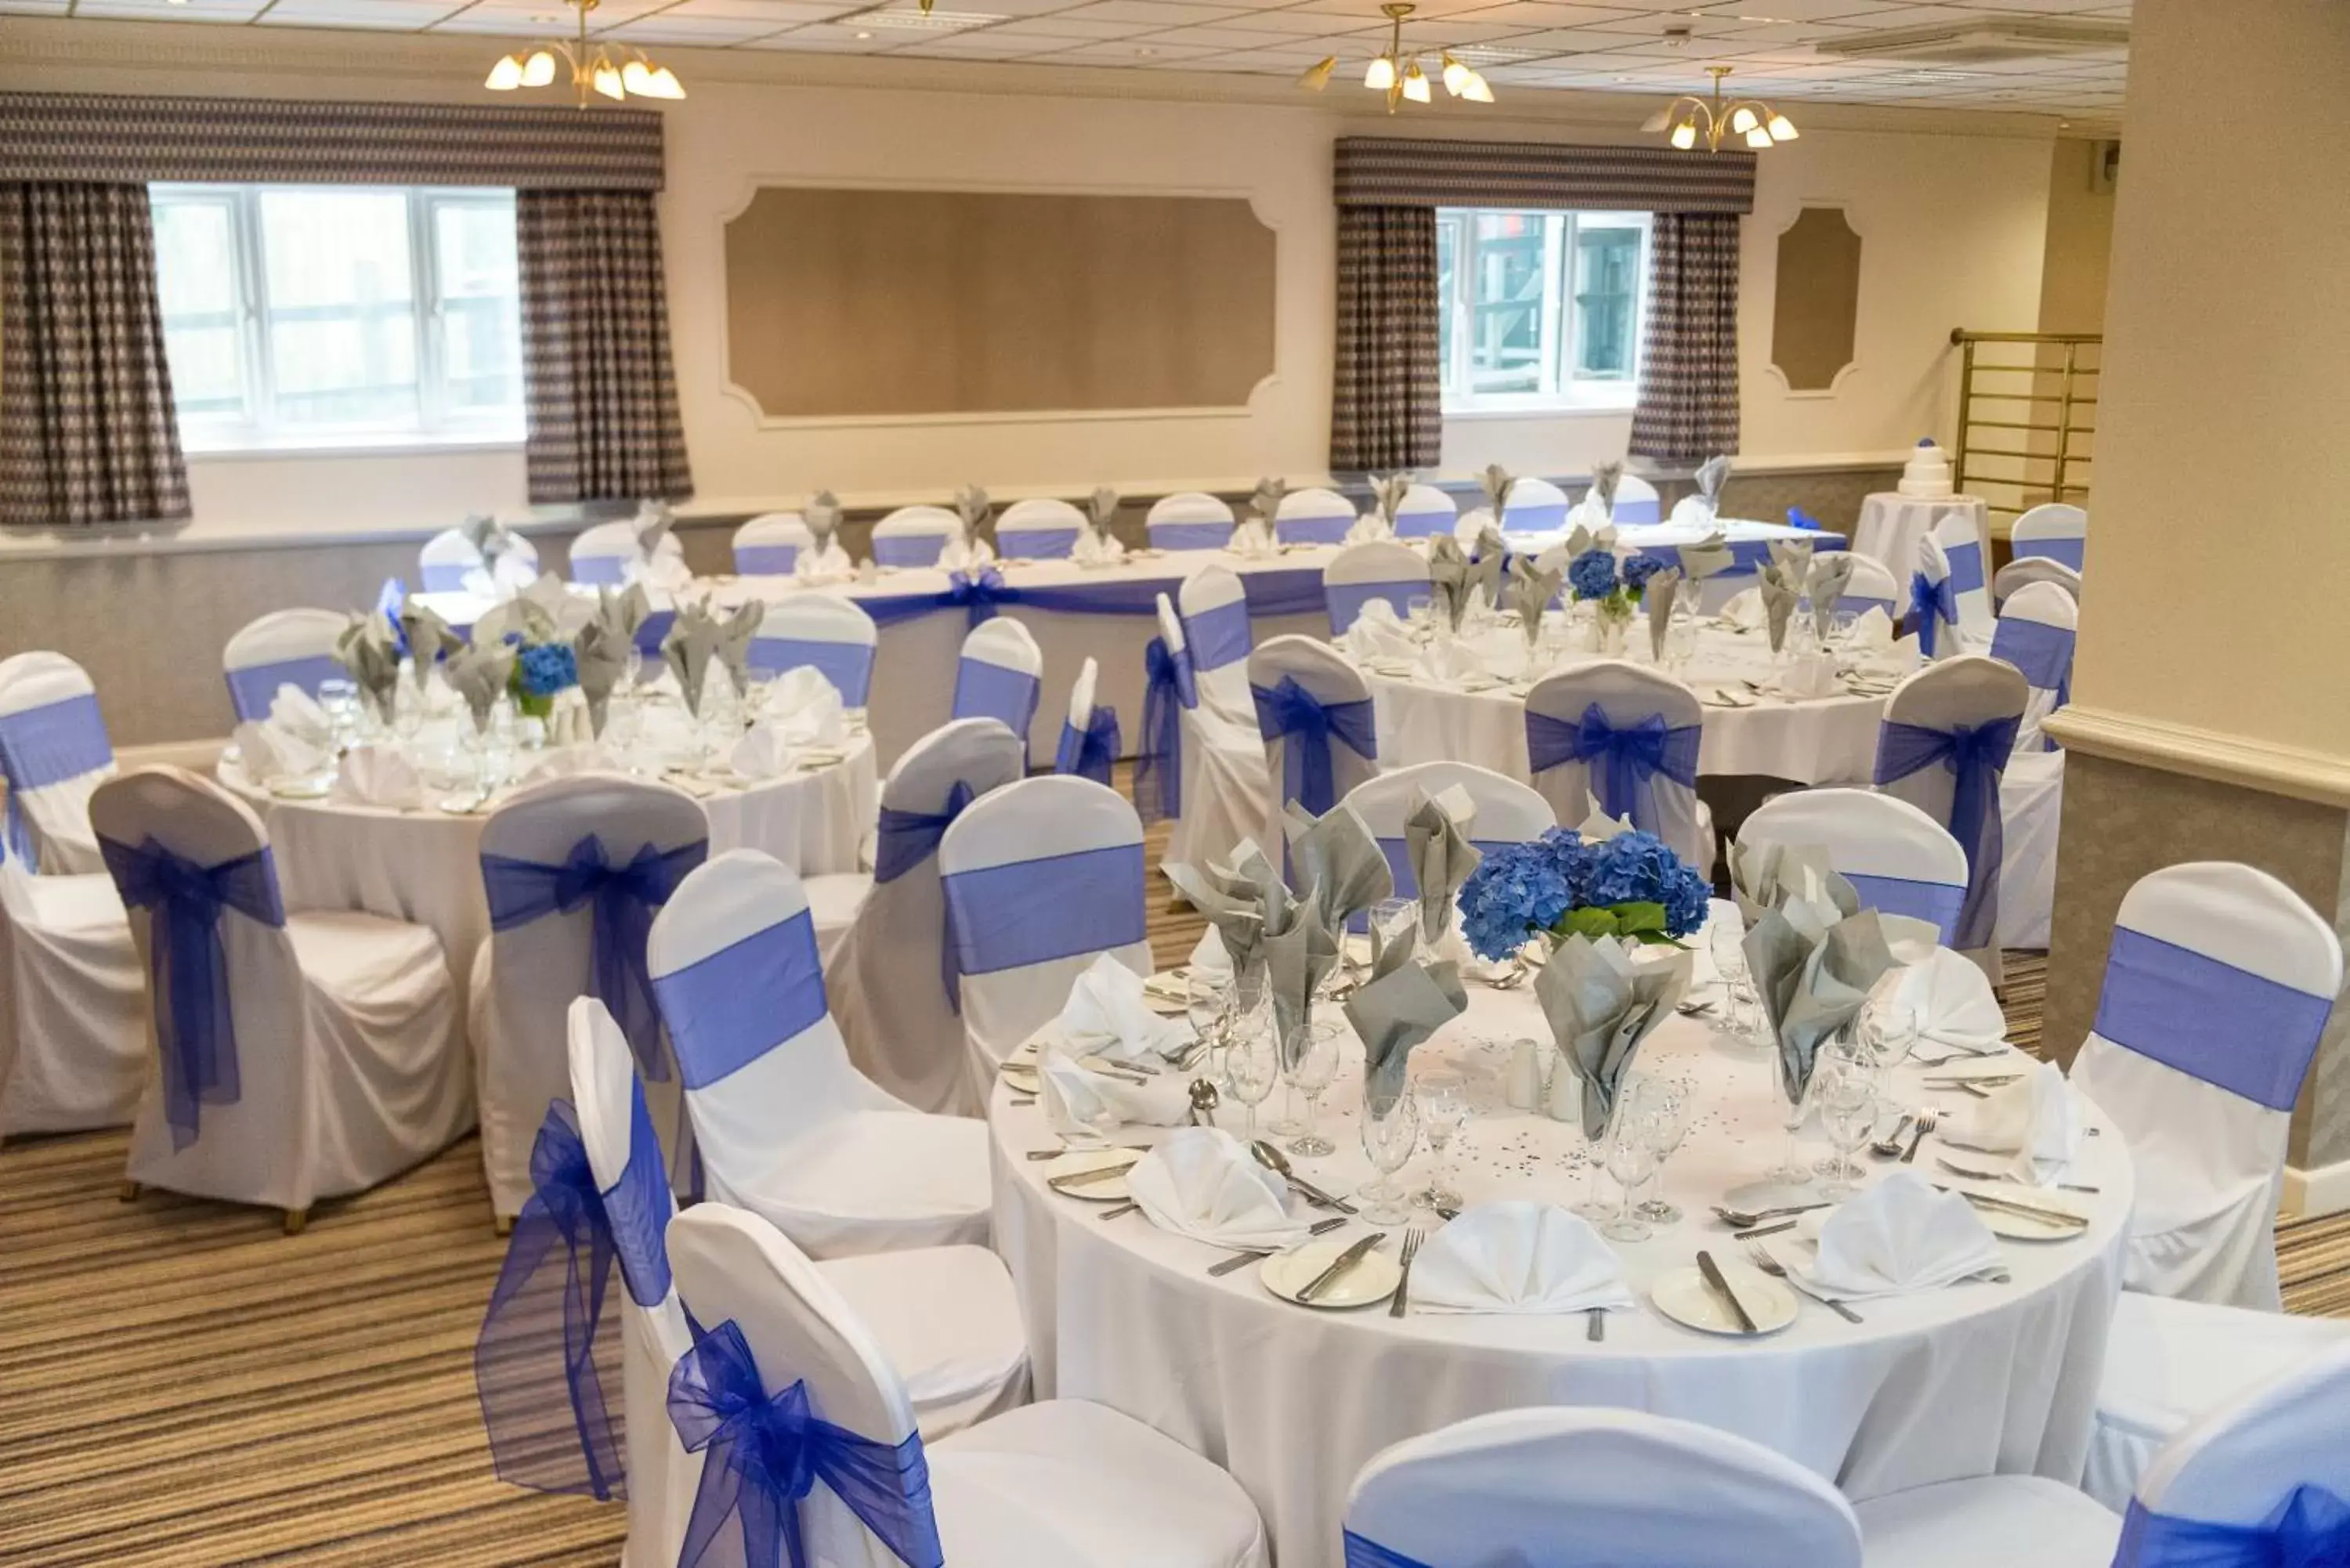 Banquet/Function facilities, Banquet Facilities in Ivy Bush Royal Hotel by Compass Hospitality